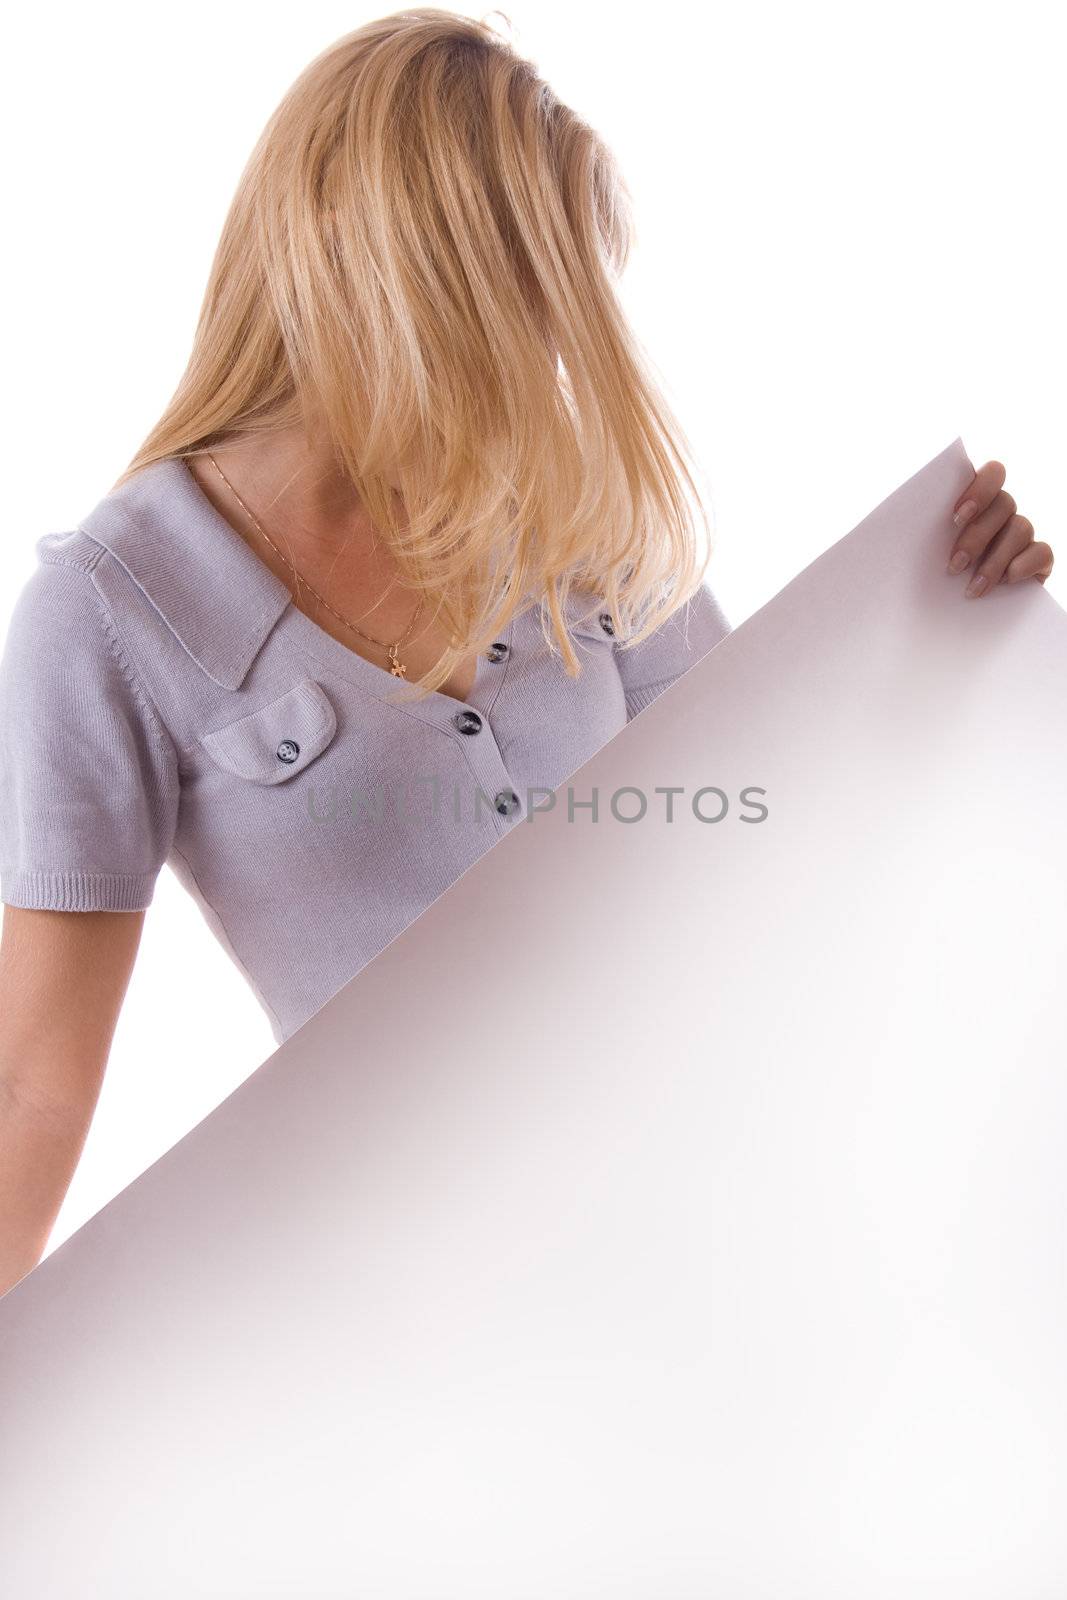 Blonde woman standing with white sheet of paper. Isolated on white. #1